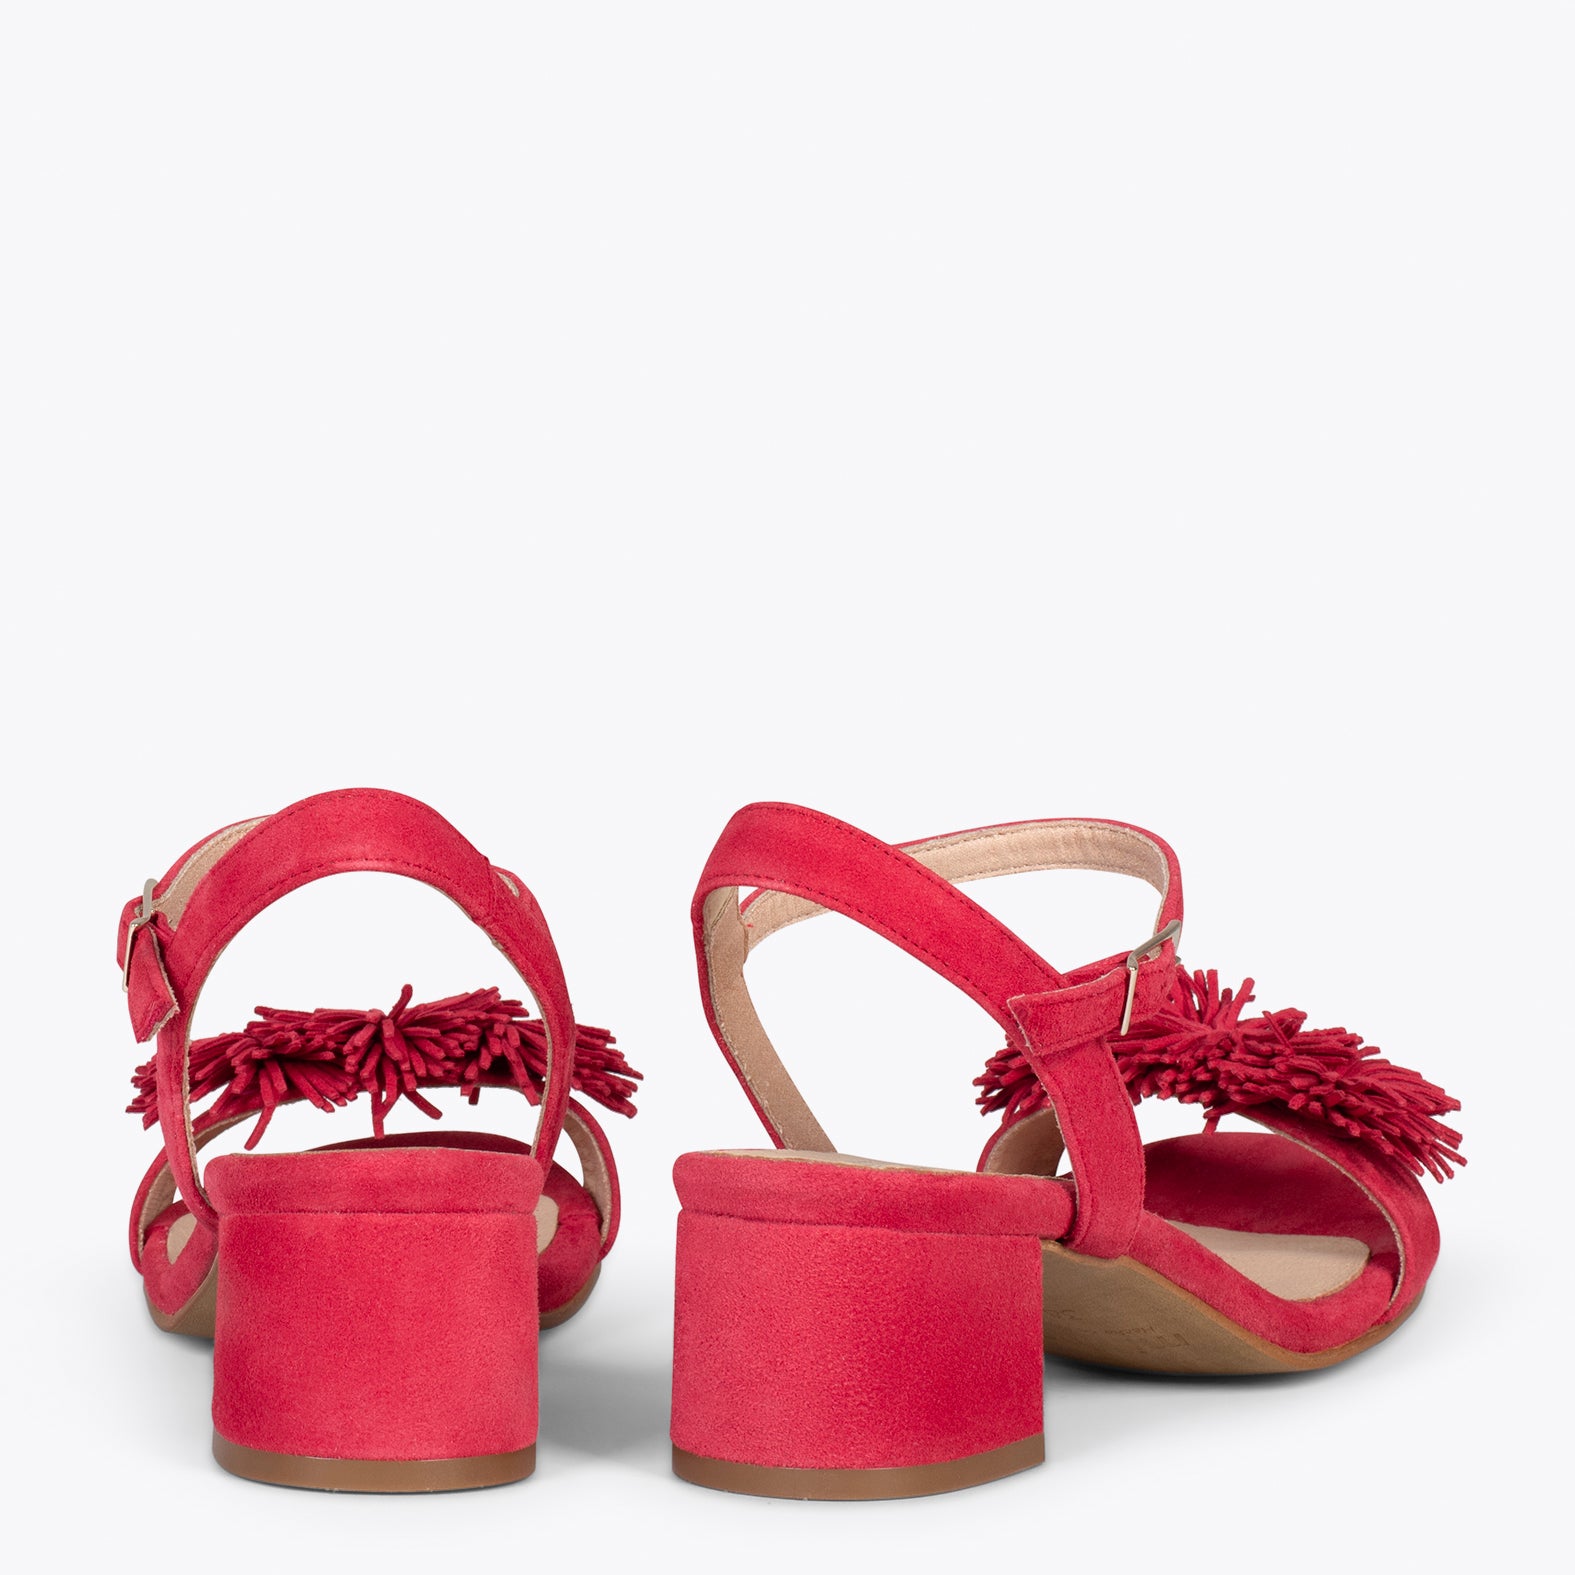 ZINNIA – RED sandals with pompom details